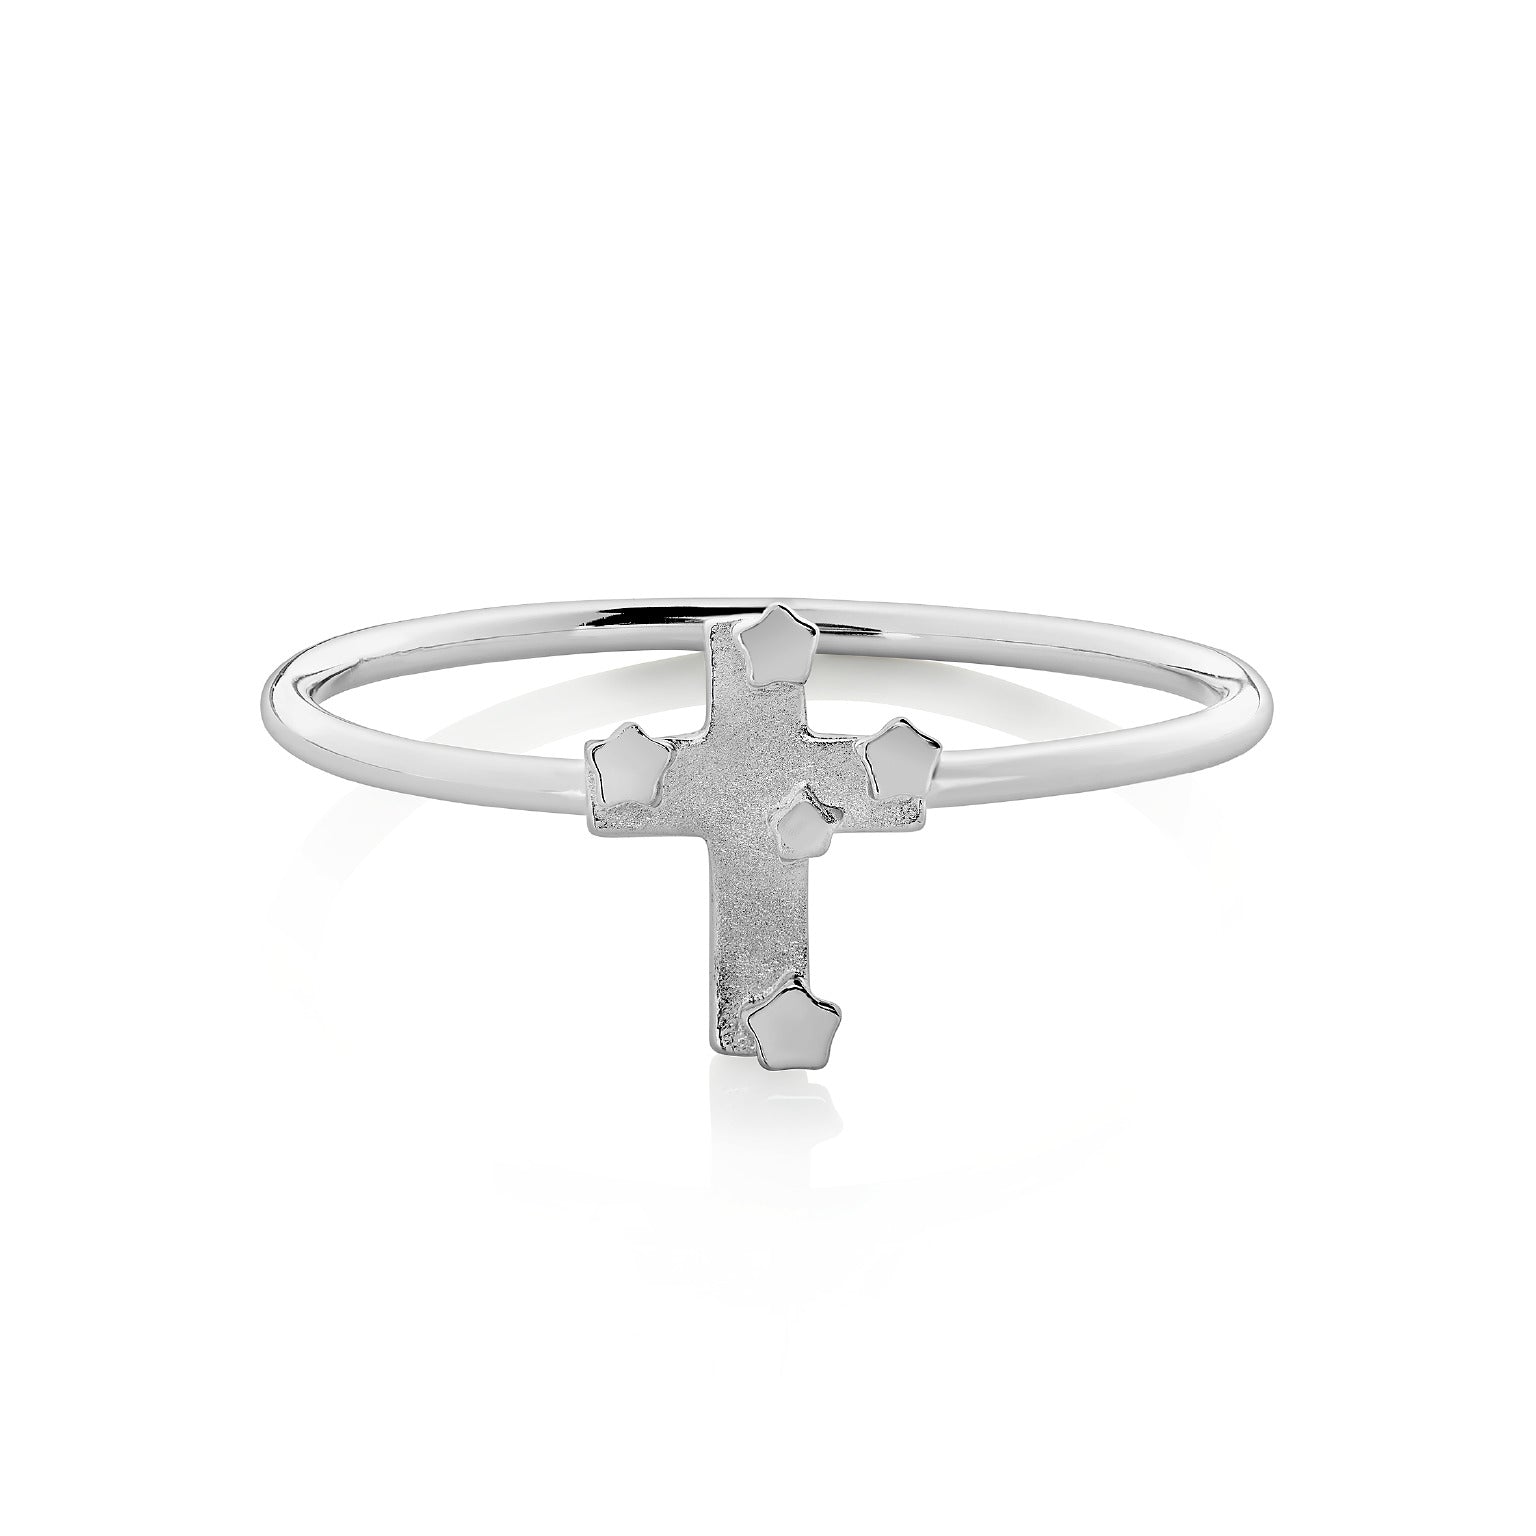 Glance collection Two Tone Cross ring bears witness of the astounding  vision of white and rose 18k gold intertwine in harmony. Graced with… |  Instagram